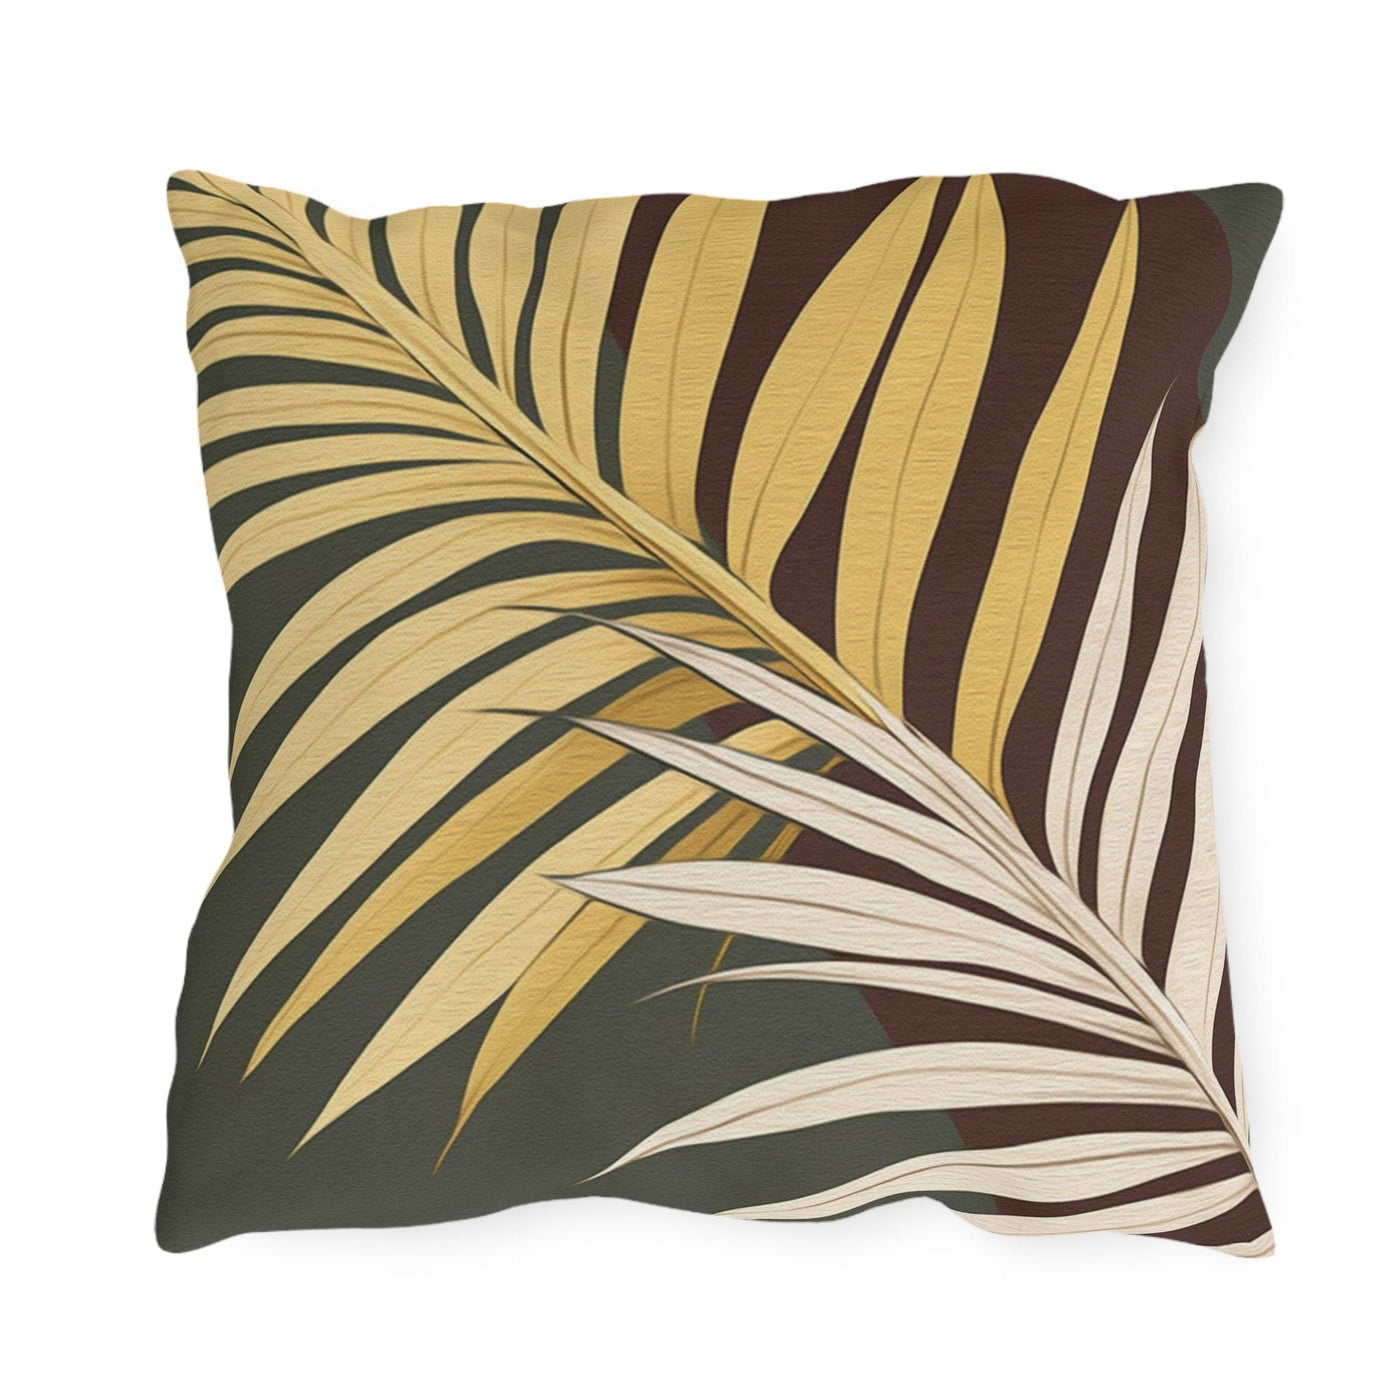 Decorative Outdoor Pillows With Zipper - Set Of 2 Palm Tree Leaves Green